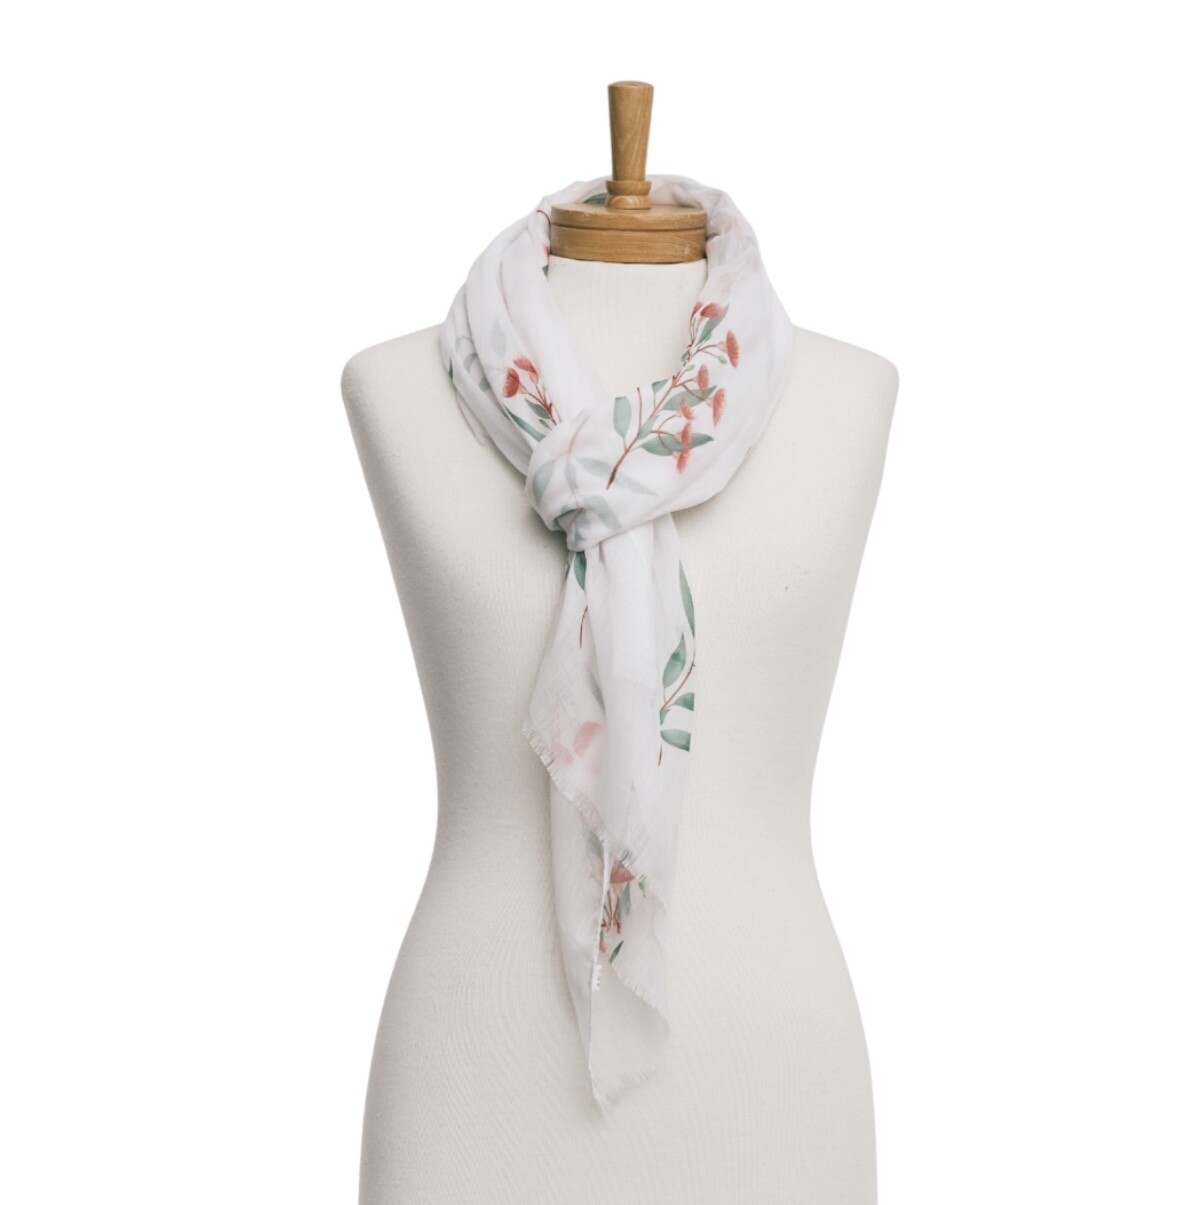 TAYLOR HILL - Scarf - Red Flowering Gum - White